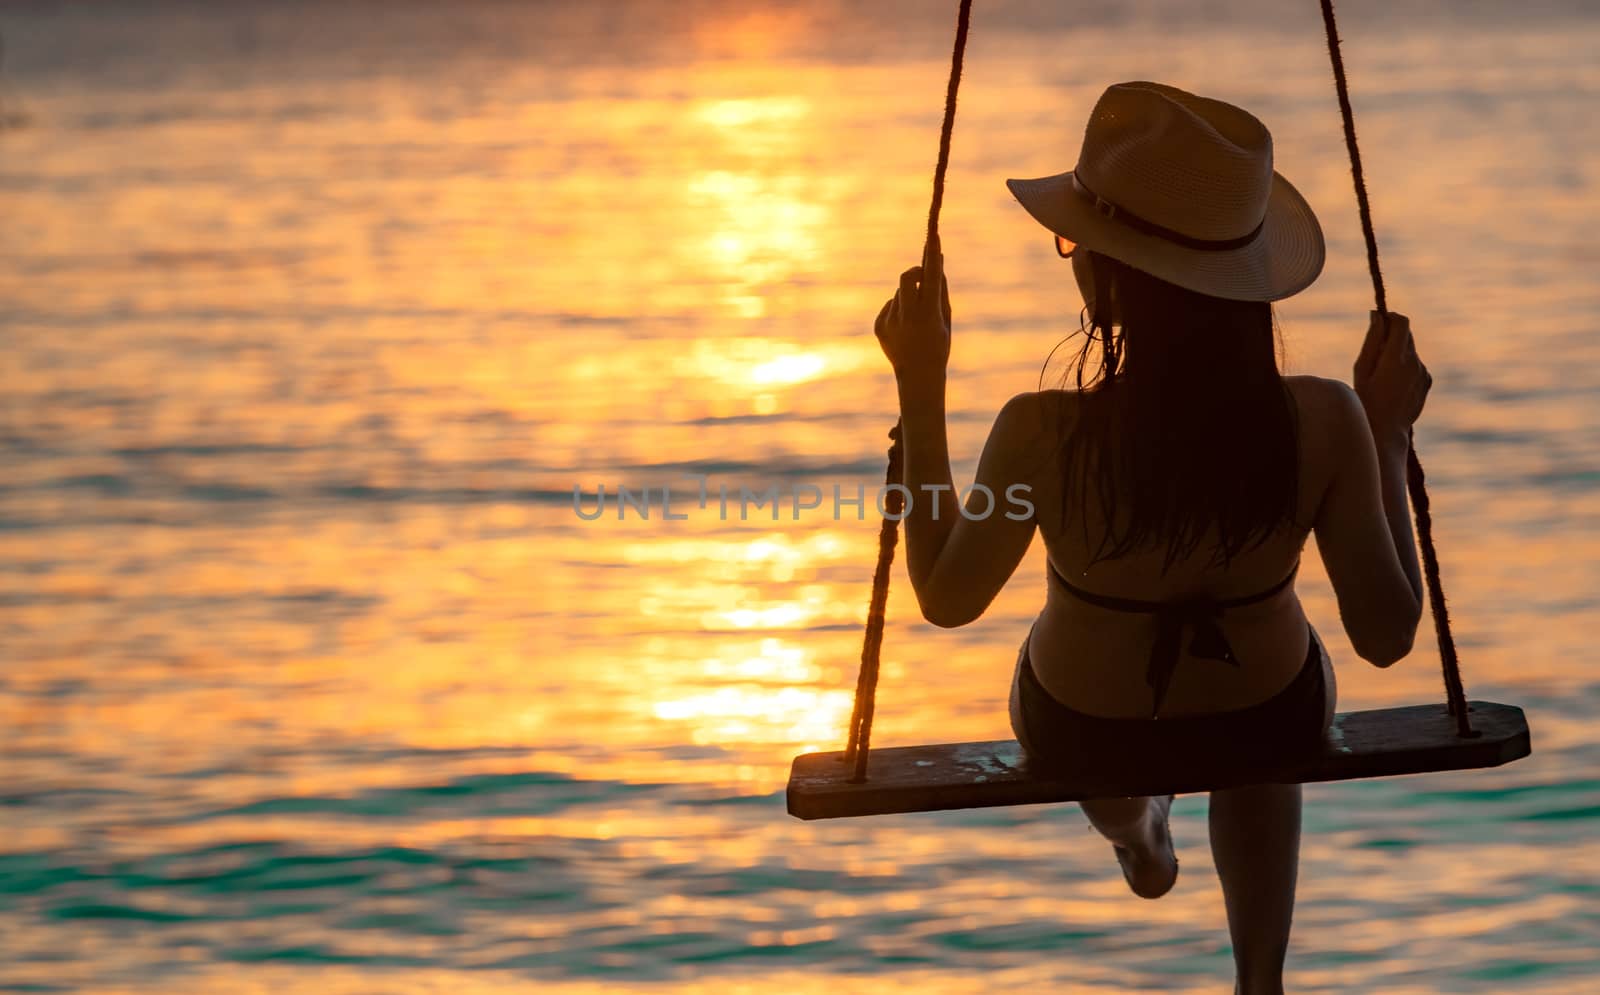 Silhouette woman wear bikini and straw hat swing the swings at the beach on summer vacation at sunset. Enjoying and relaxing girl on holiday. Summer vibes. Woman watching beautiful sunset sky. 